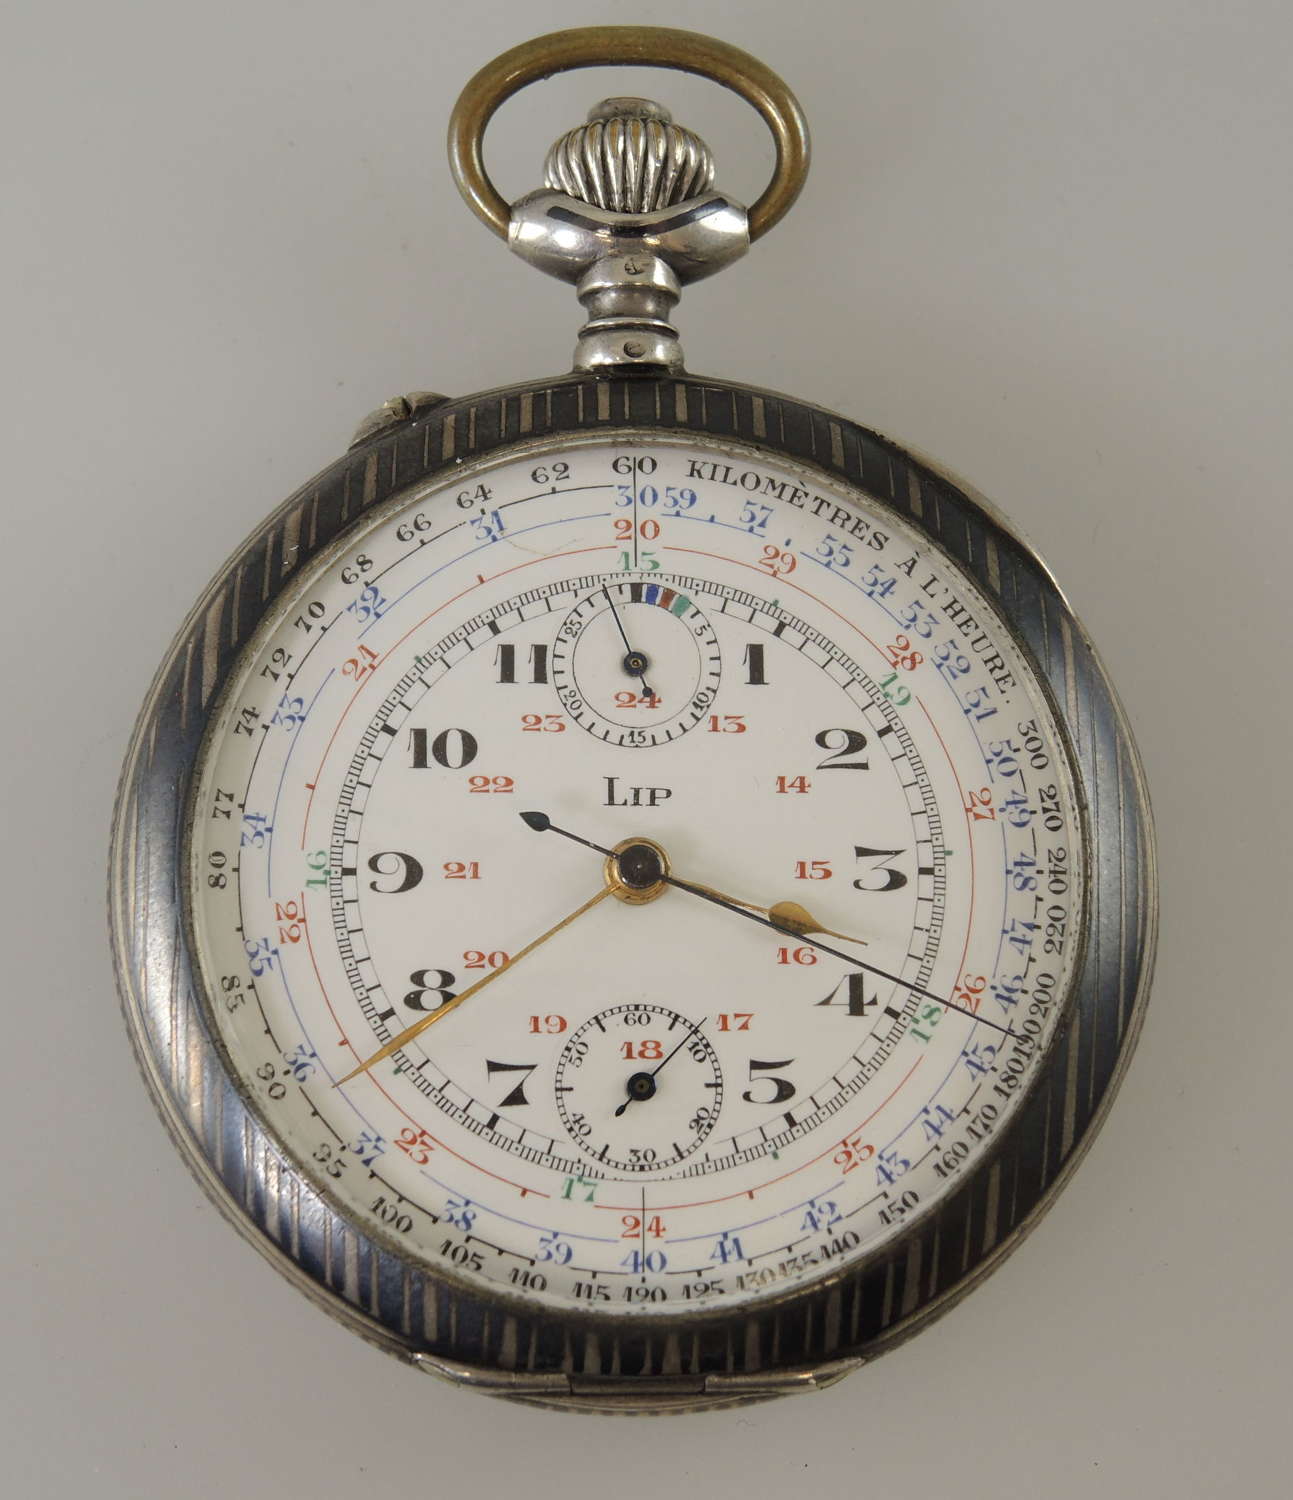 Silver and Niello enamel Chronograph pocket watch by Lip c1910